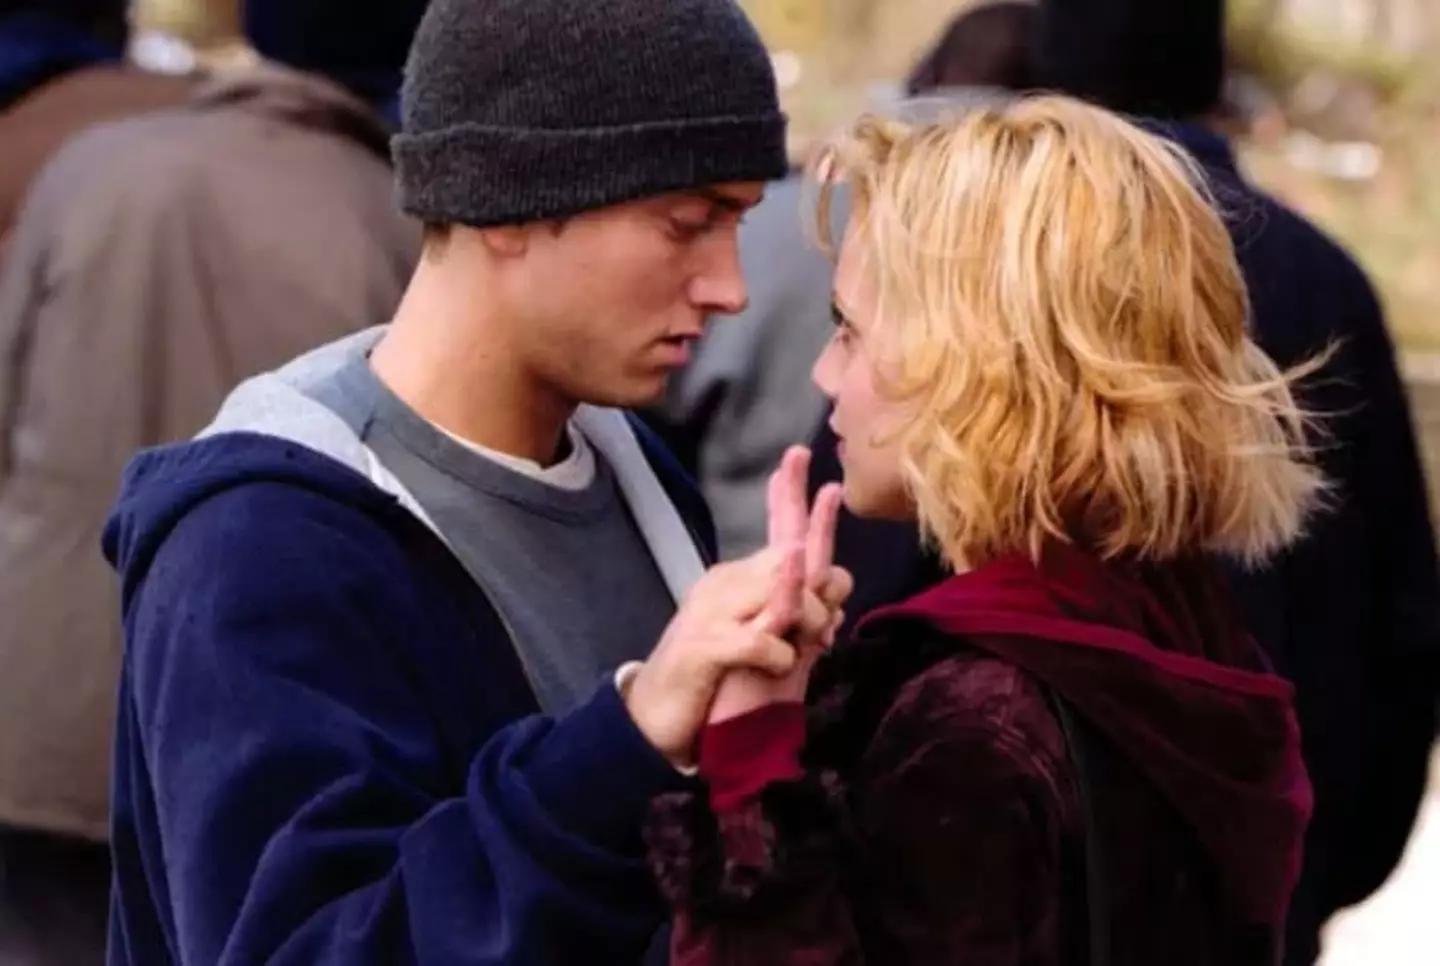 Murphy was taught the cheeky gesture whilst filming 8 Mile.